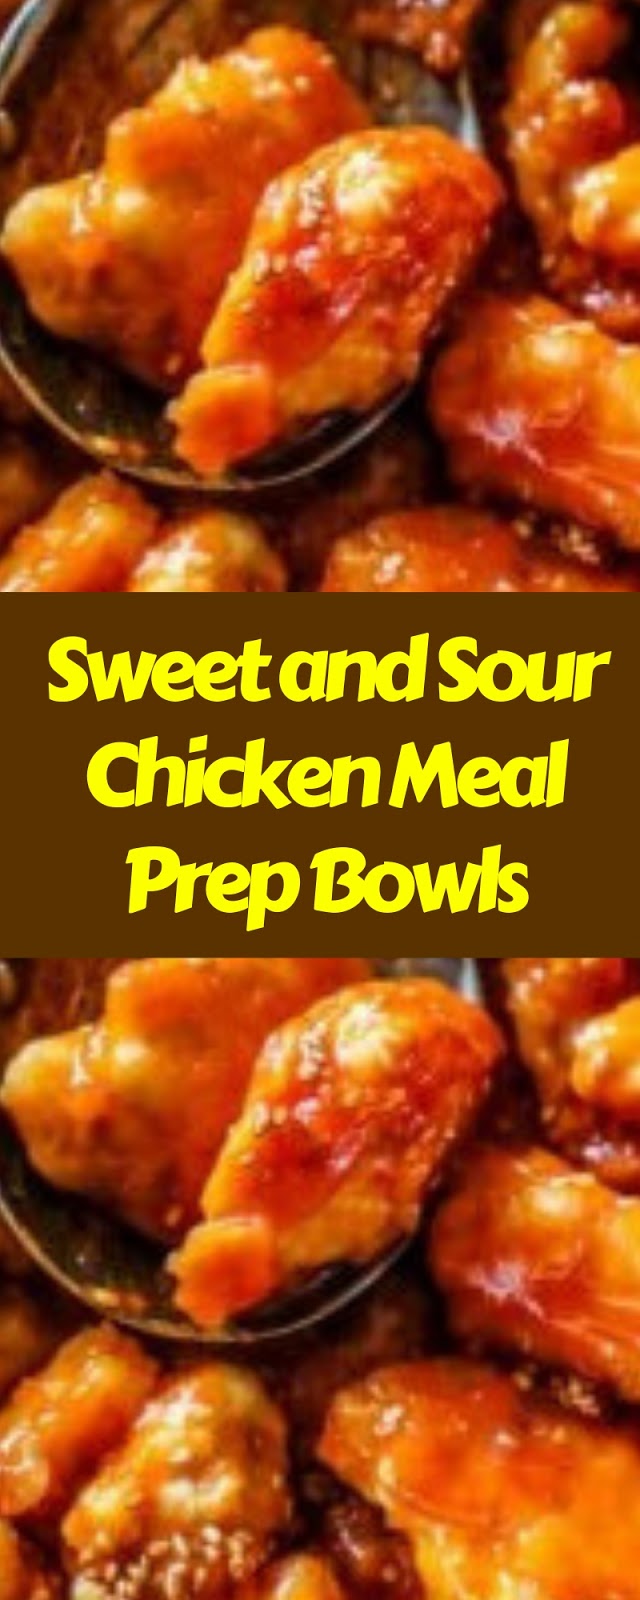 Sweet and Sour Chicken Meal Prep Bowls